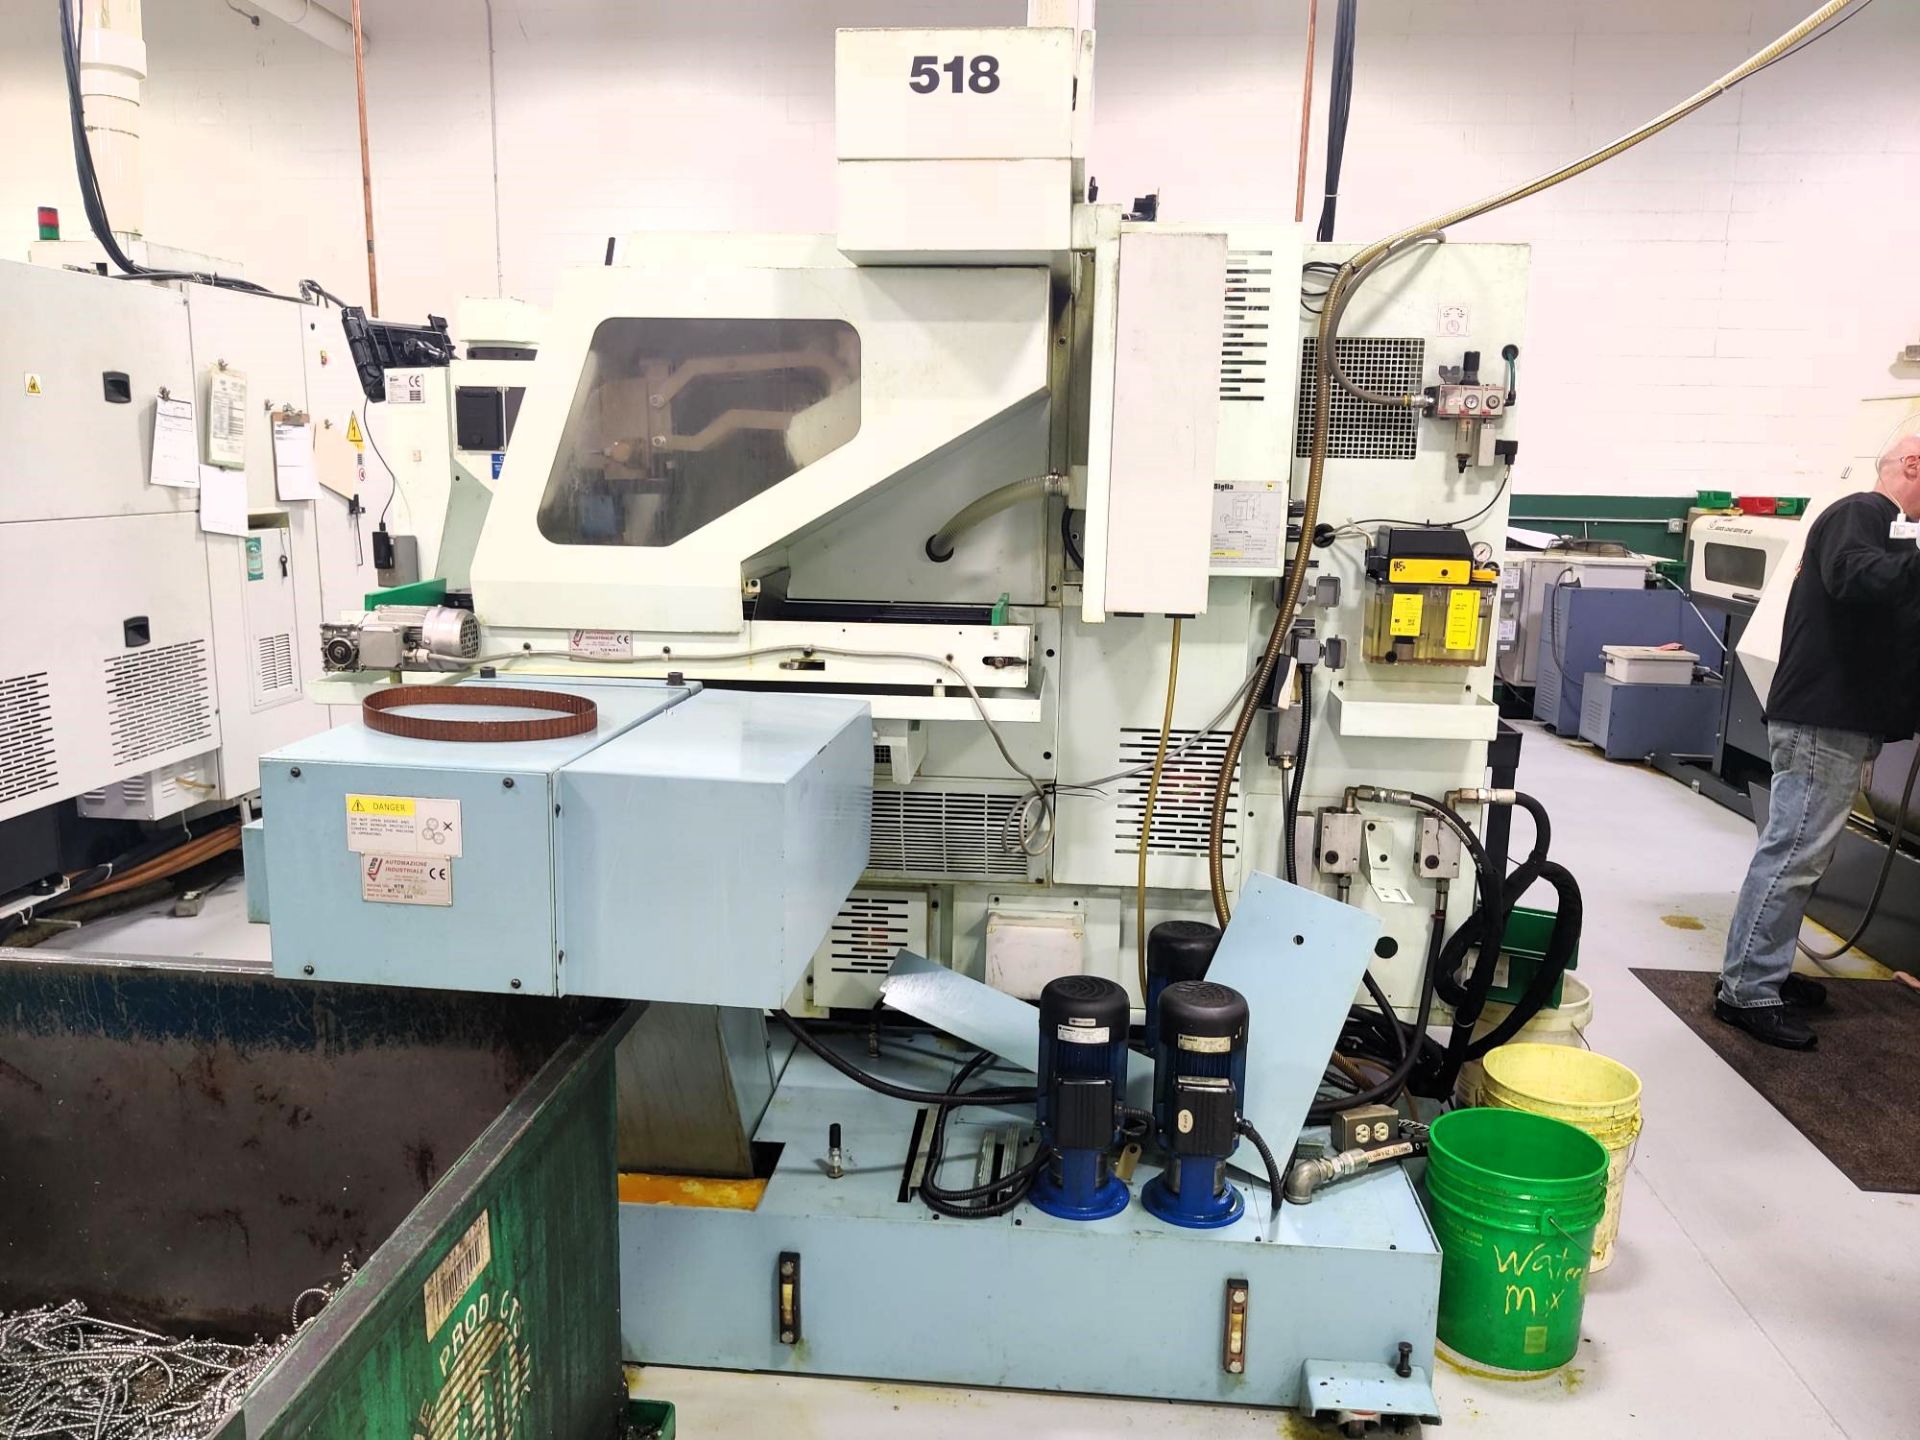 EUROTECH ELITE B446 Y2 TWIN SPINDLE TWIN TURRET CNC LATHE W/DUAL Y-AXIS, NEW 2009, SN 10534 - Image 3 of 8